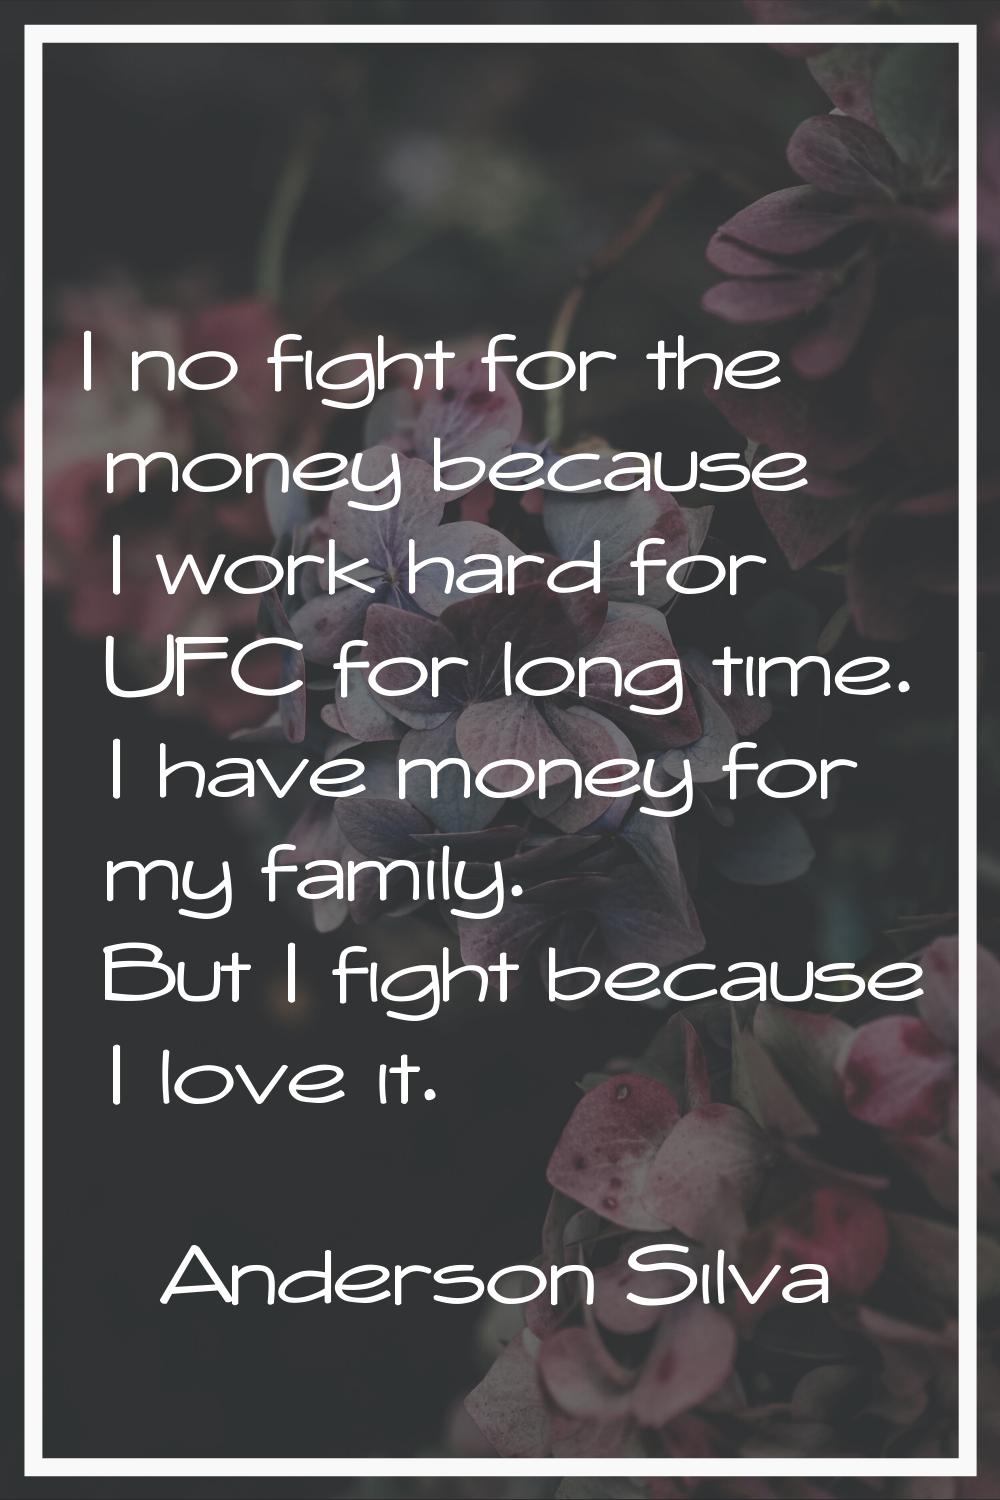 I no fight for the money because I work hard for UFC for long time. I have money for my family. But